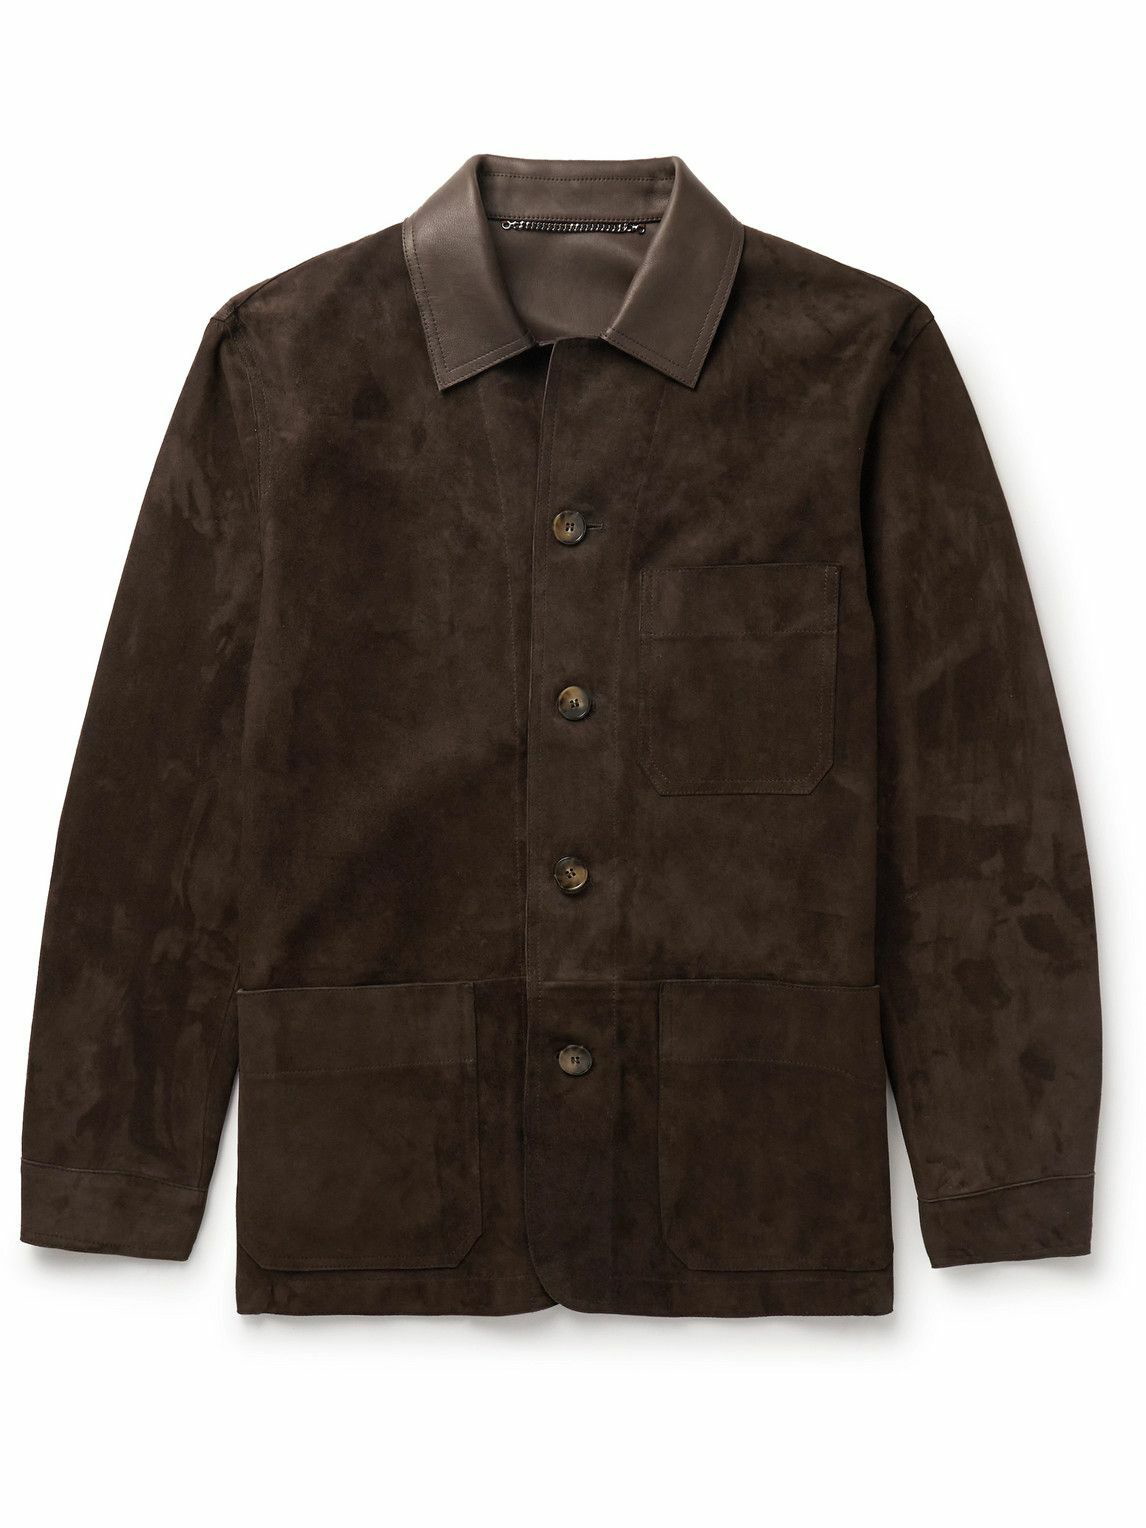 Canali - Leather-Trimmed Suede Chore Jacket - Brown Canali